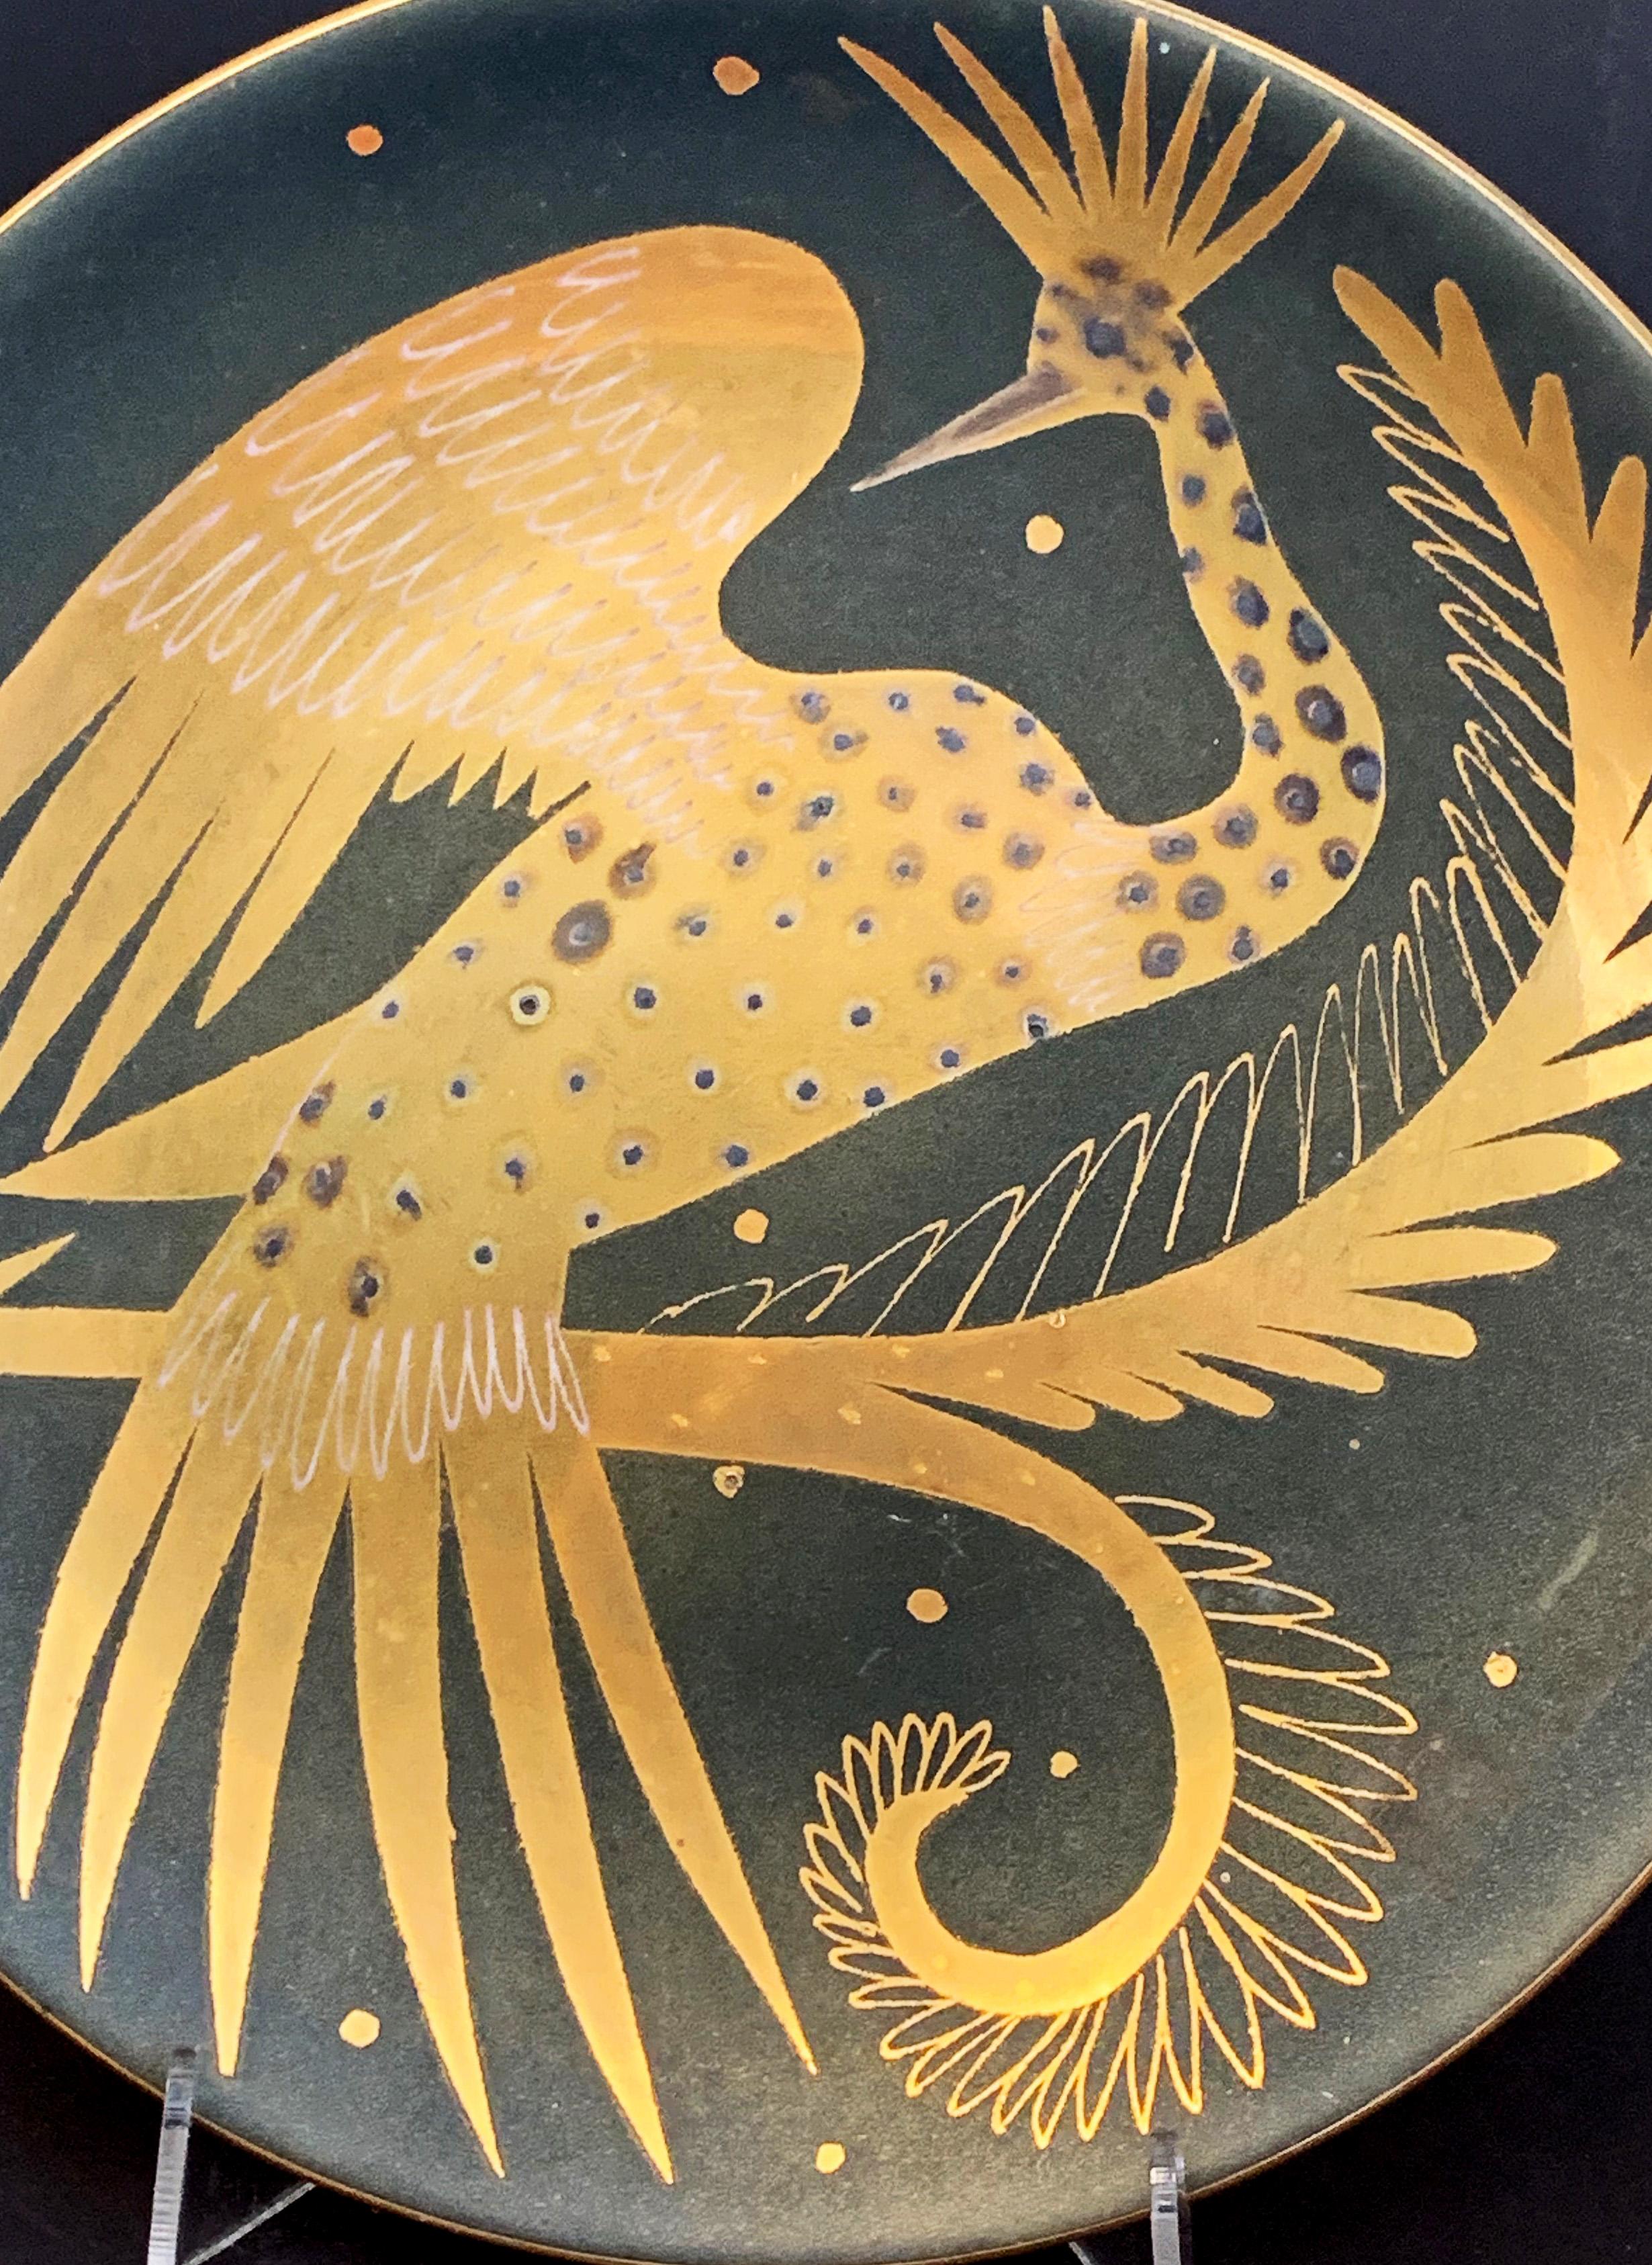 Richly finished in gold and charcoal-hued glazes, this decorative plate features a large, fantastical phoenix bird, with outspread wing, curving tail and spiky plumage. The artist was Waylande Gregory, who was prodigious and indefatigable over a